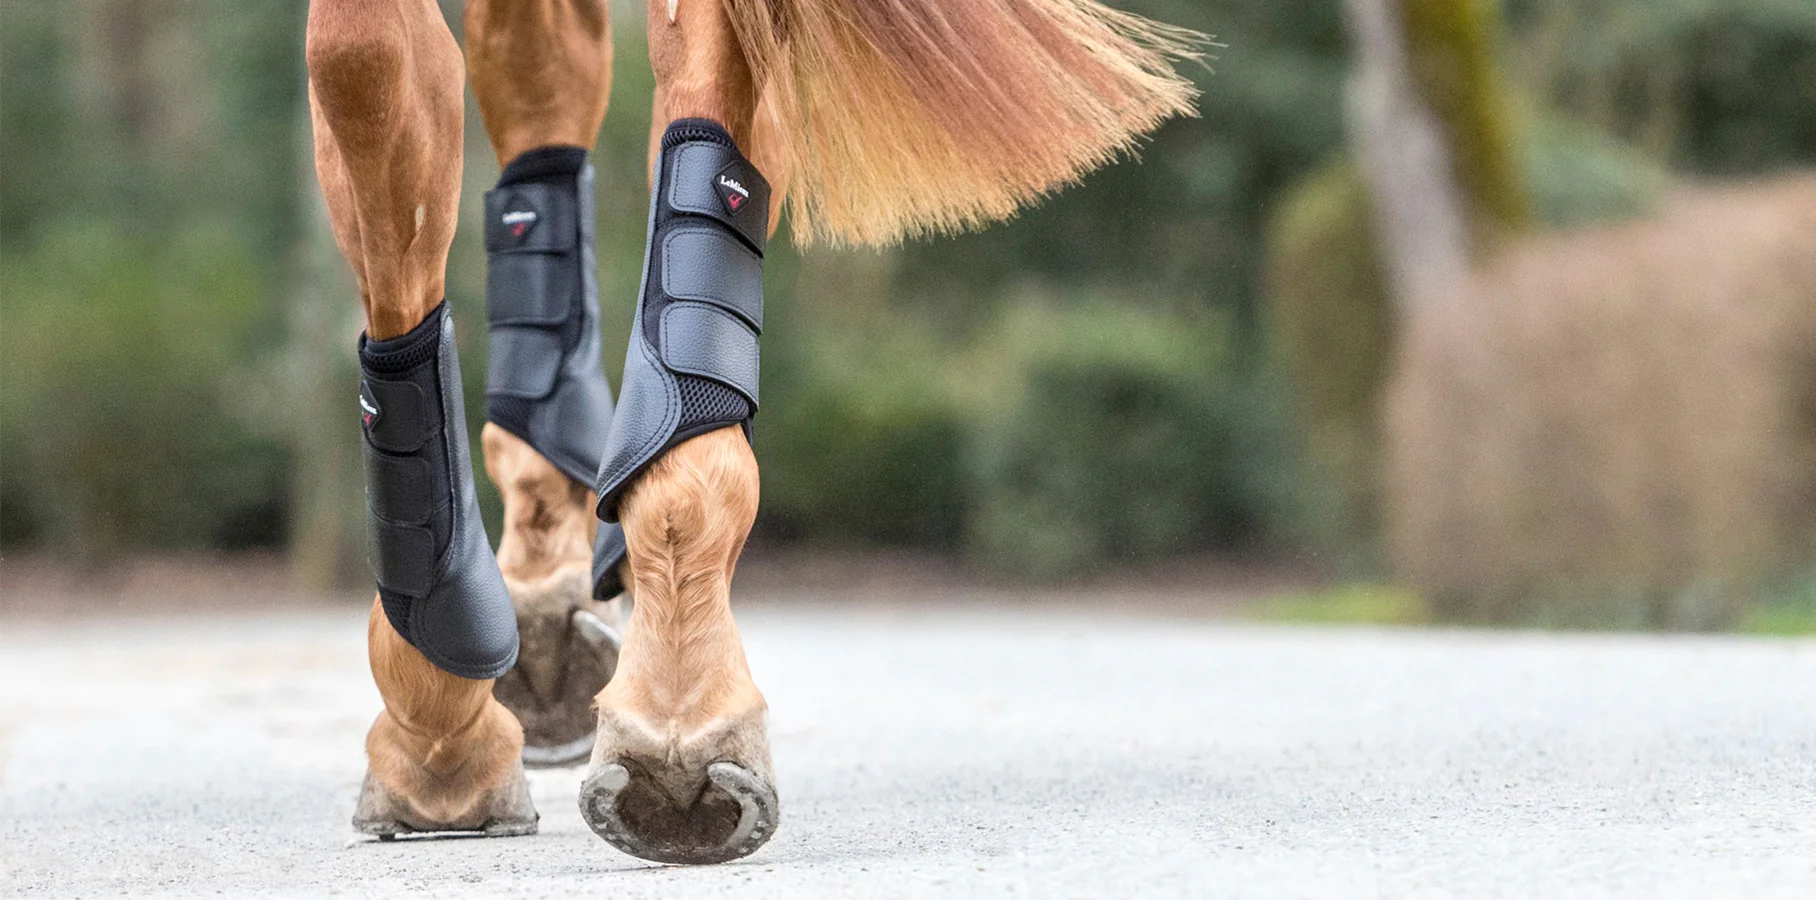 How to put on tendon boots by Team Horsemart